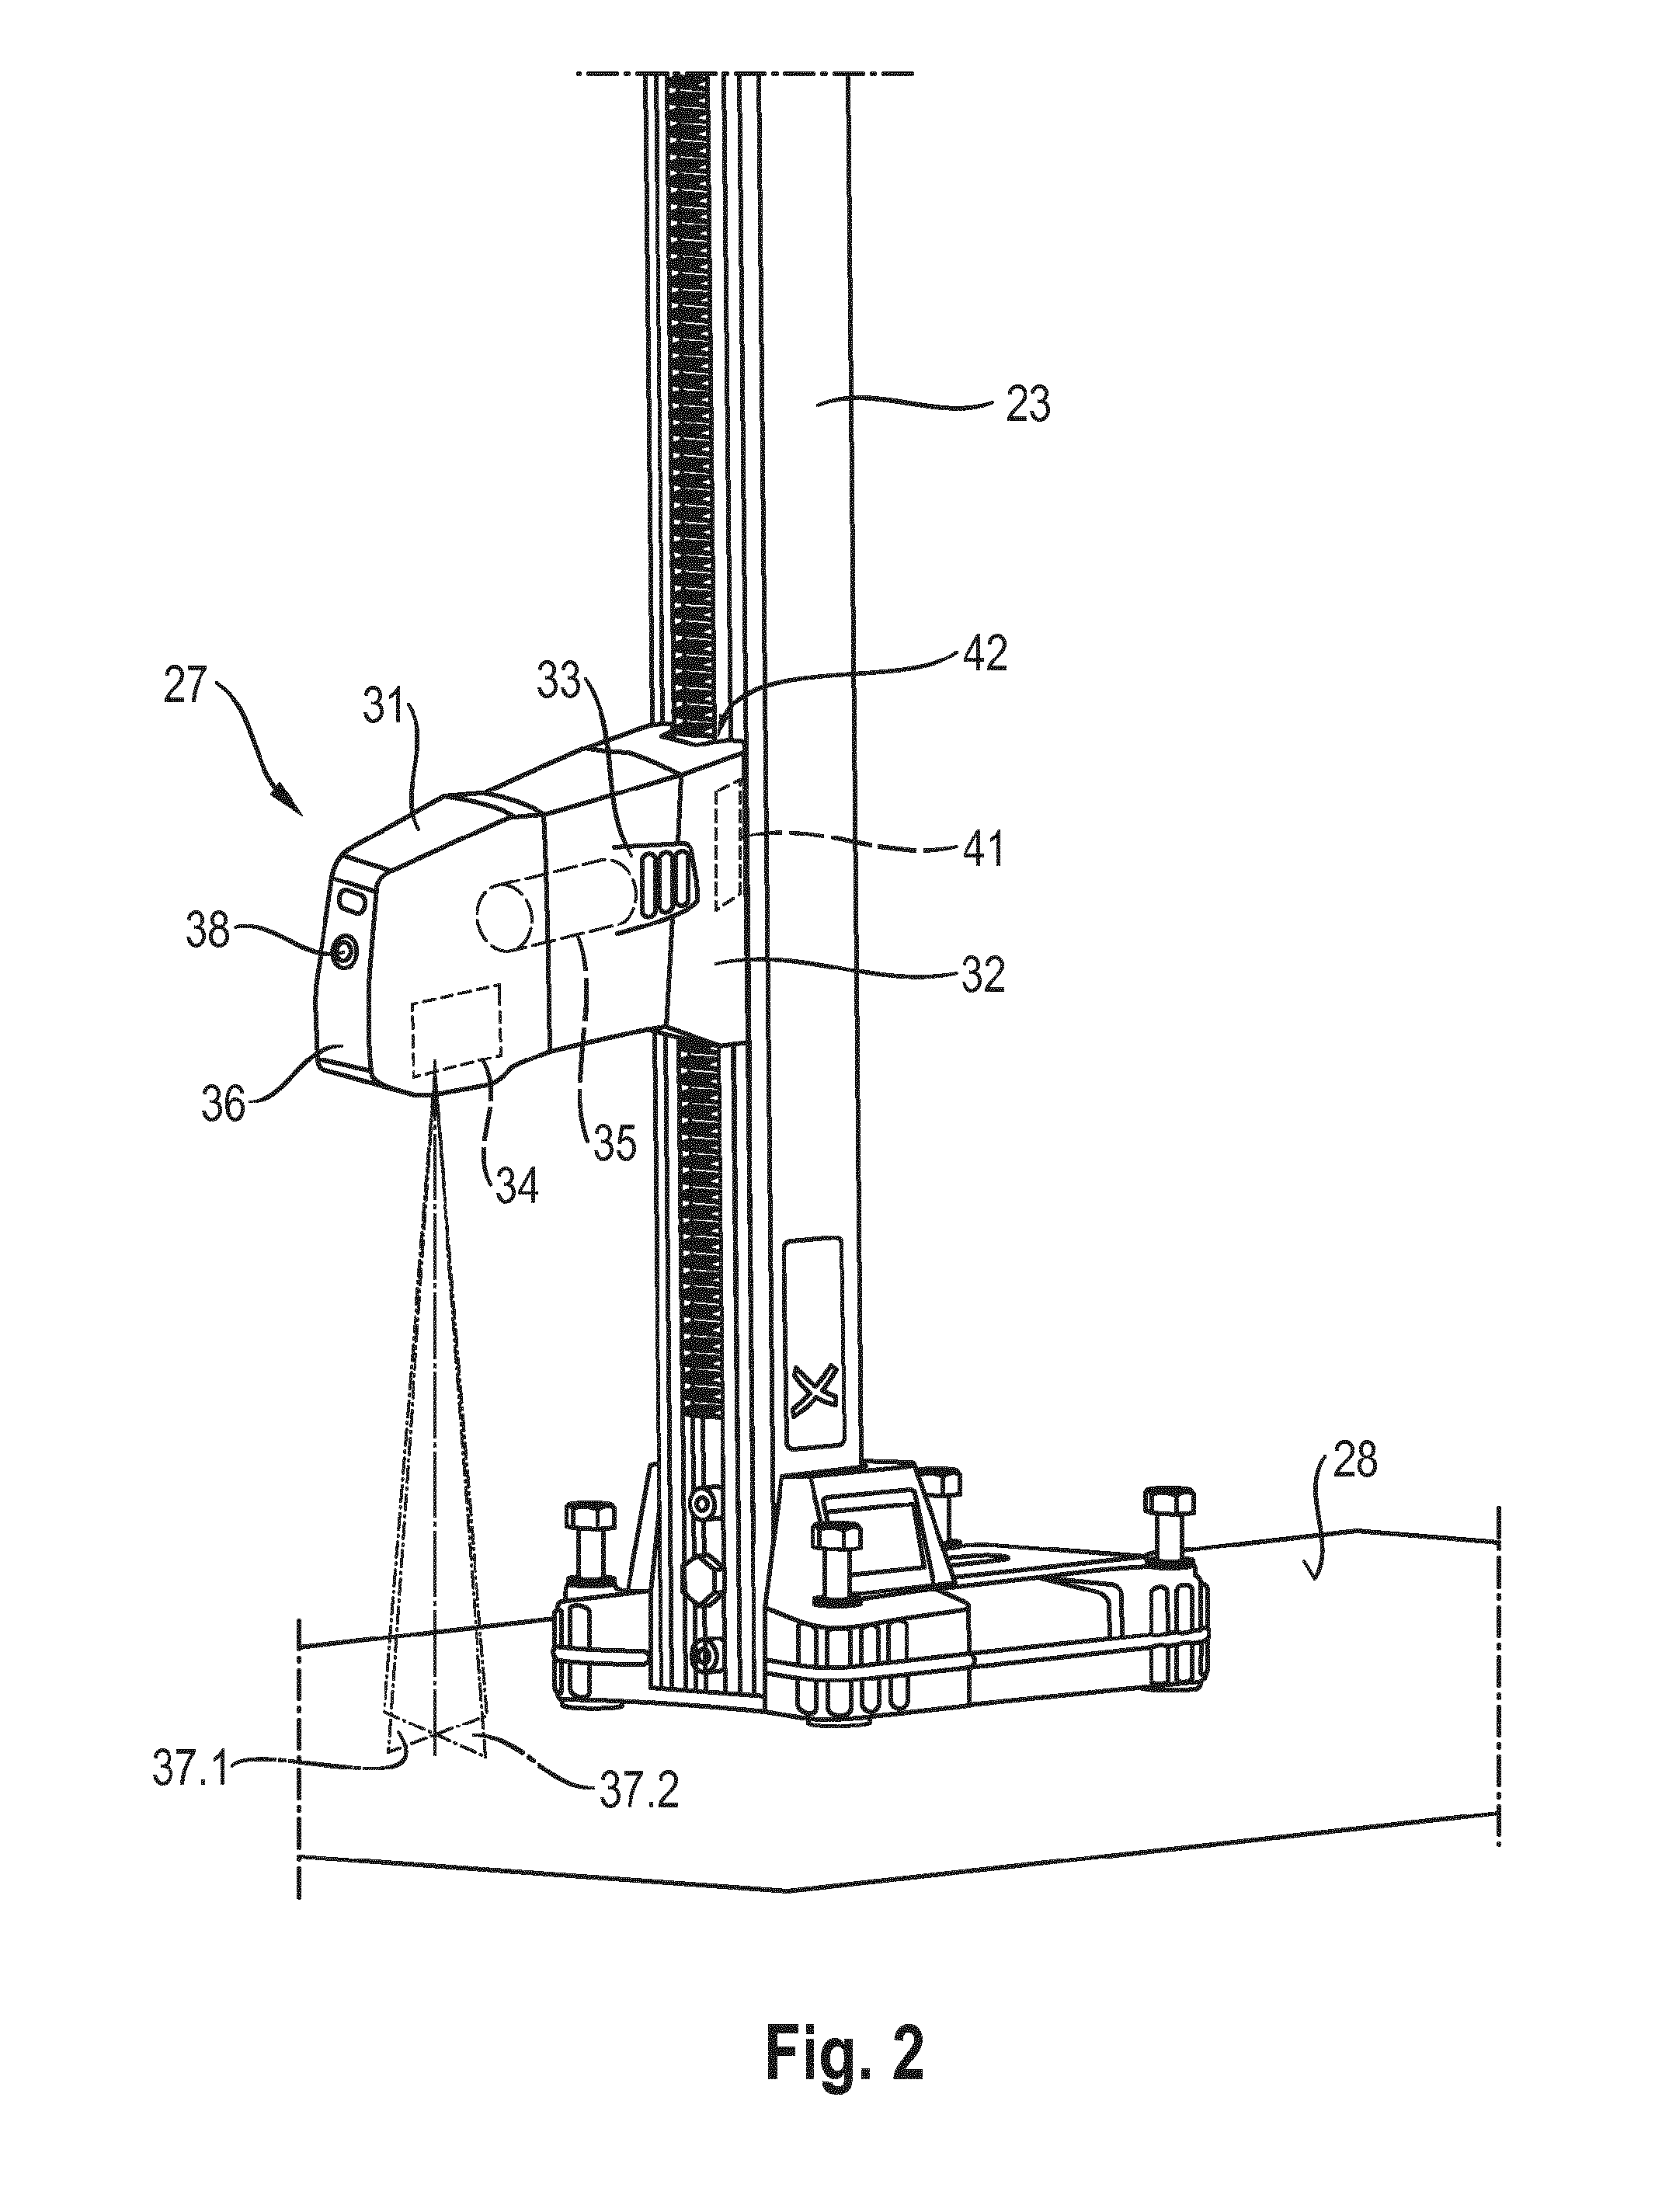 Device system having a positioning apparatus for determining a bore center point